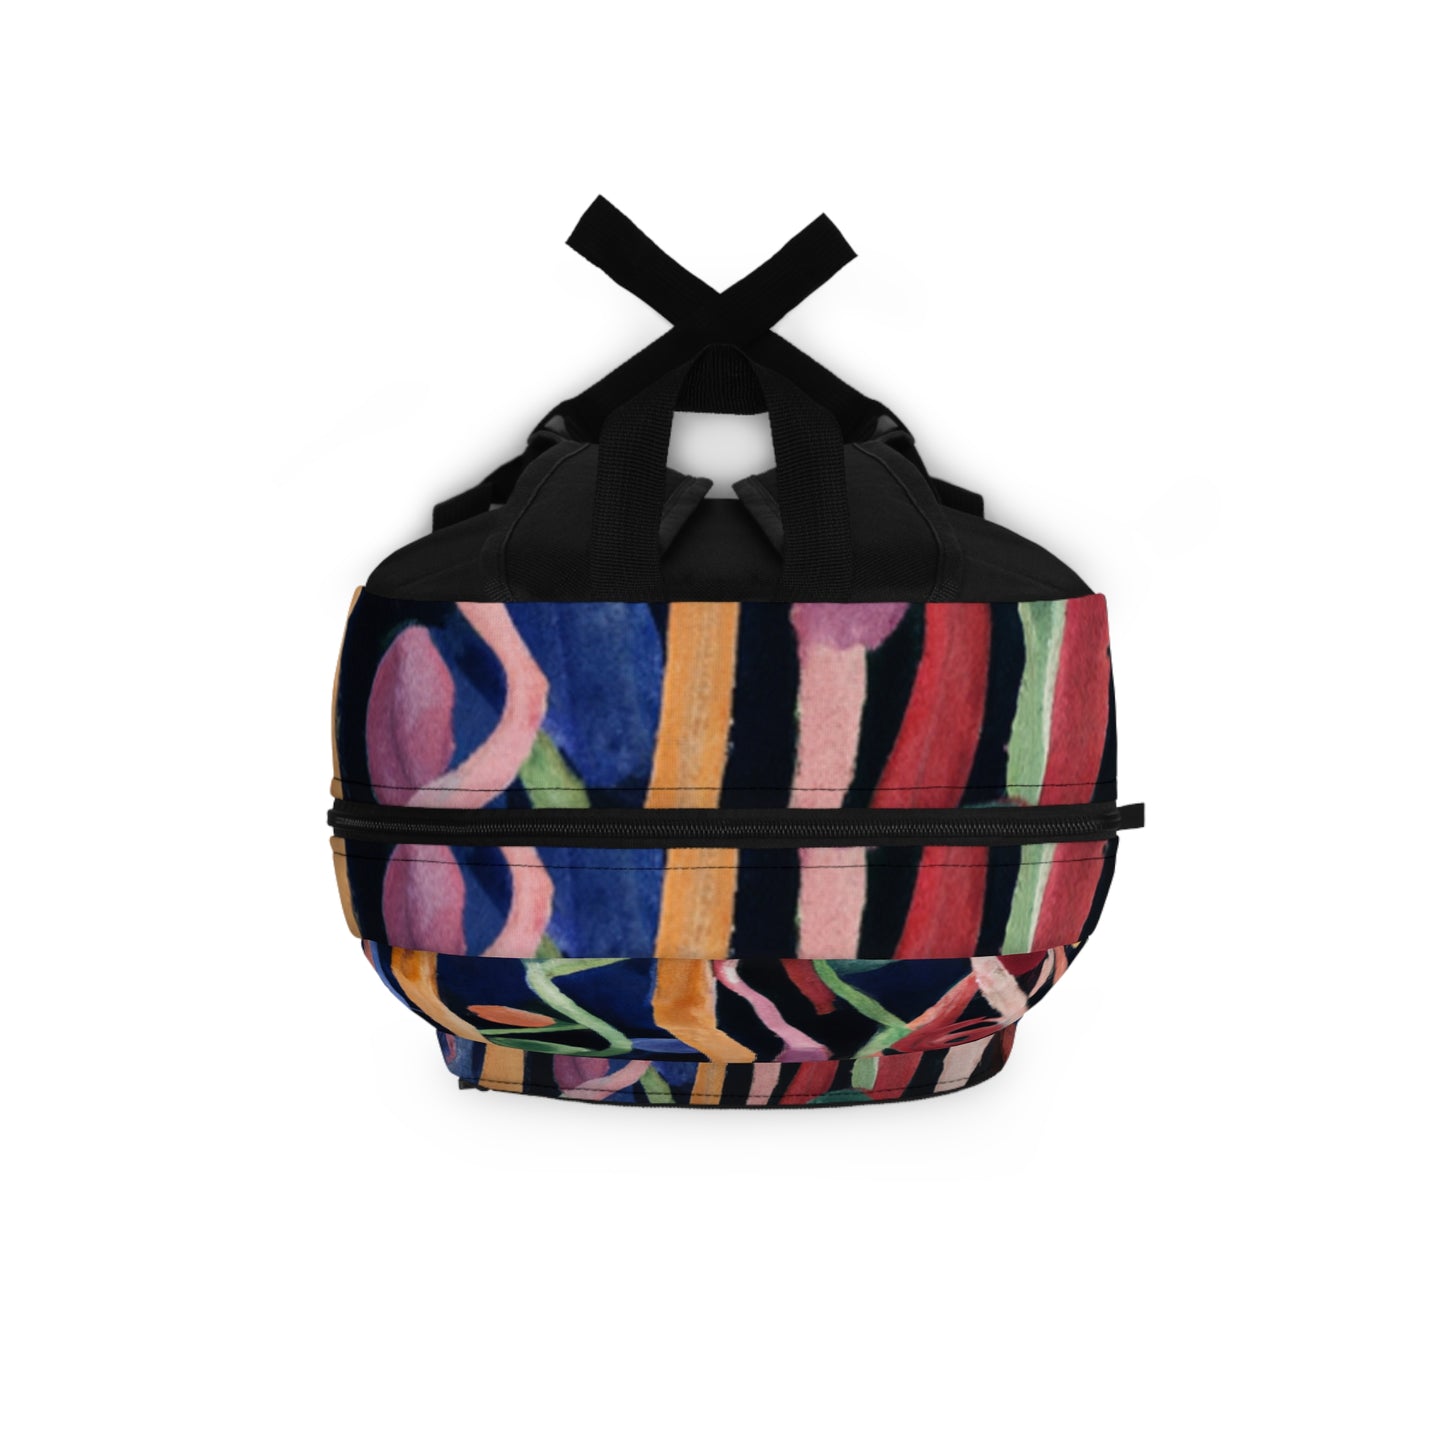 Iolanthe Diamantopoulos - Backpack